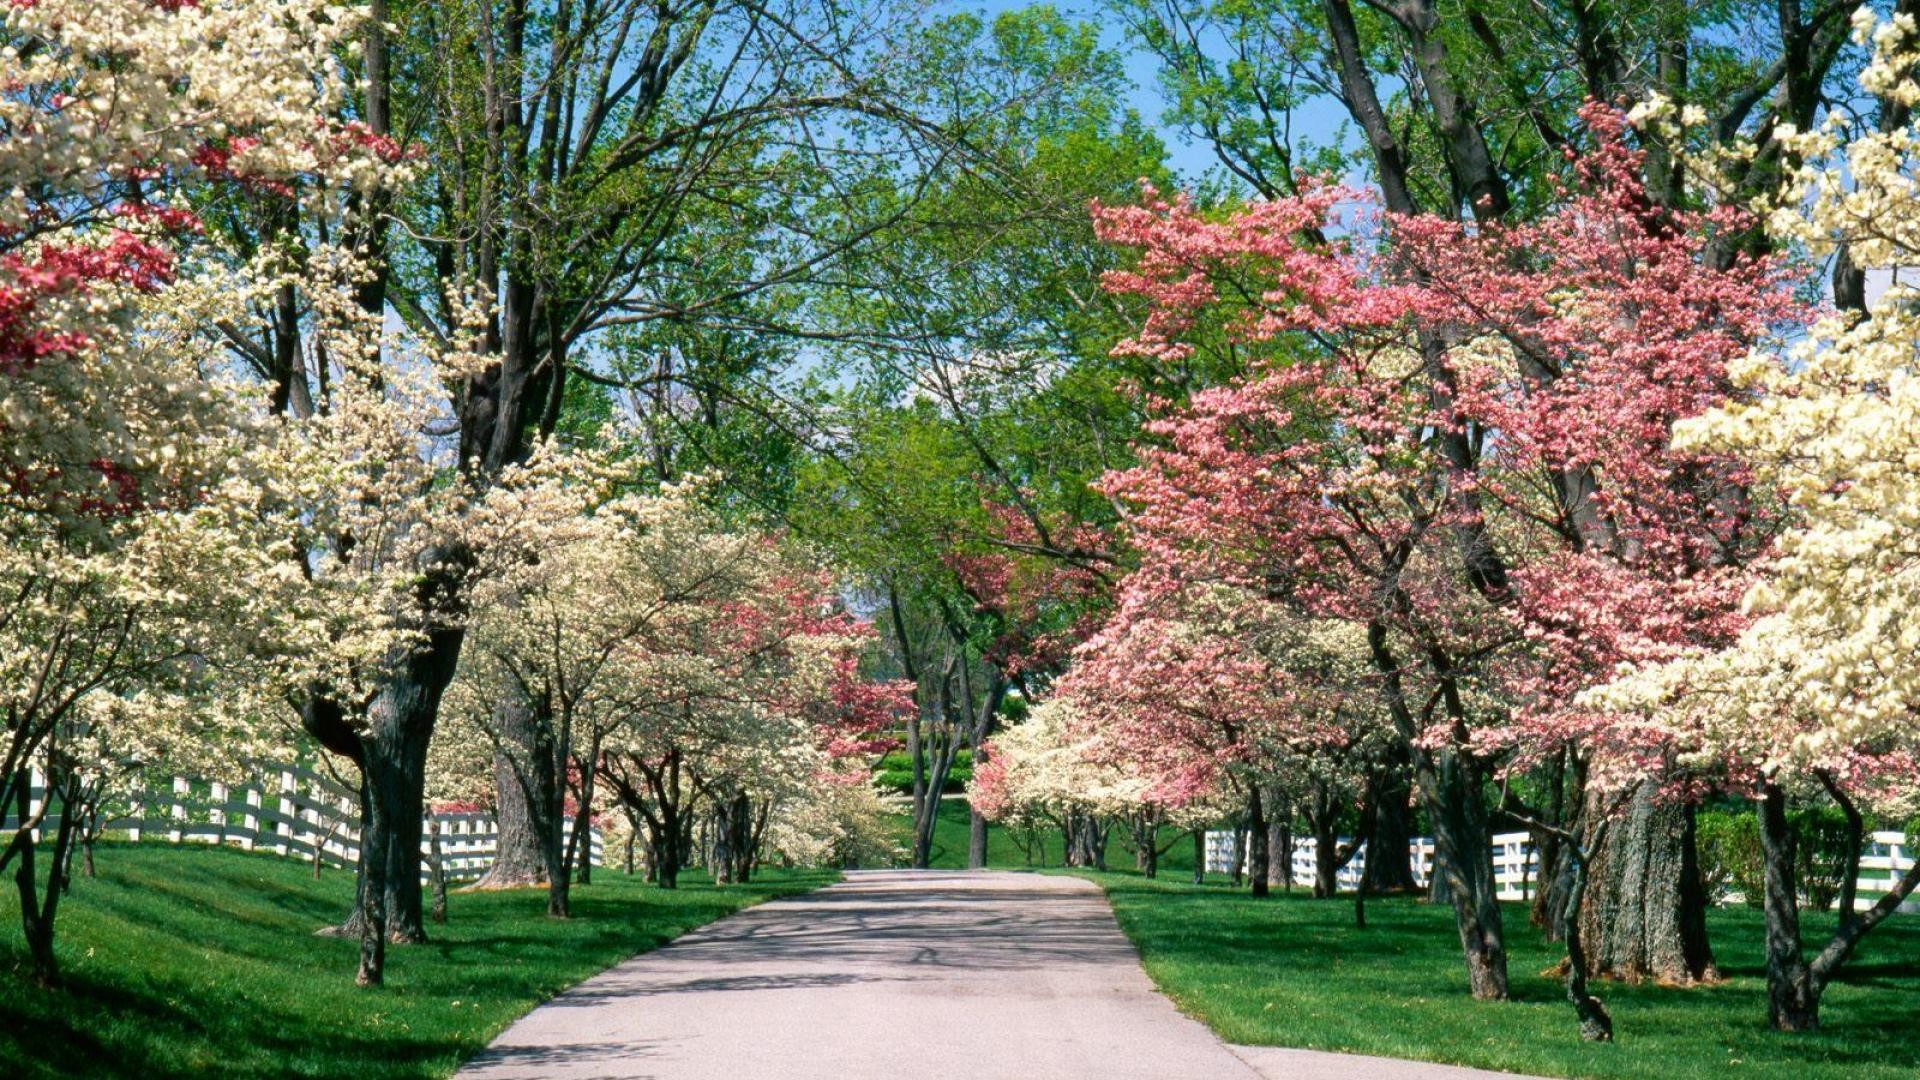 General 1920x1080 park spring blossoms path trees outdoors